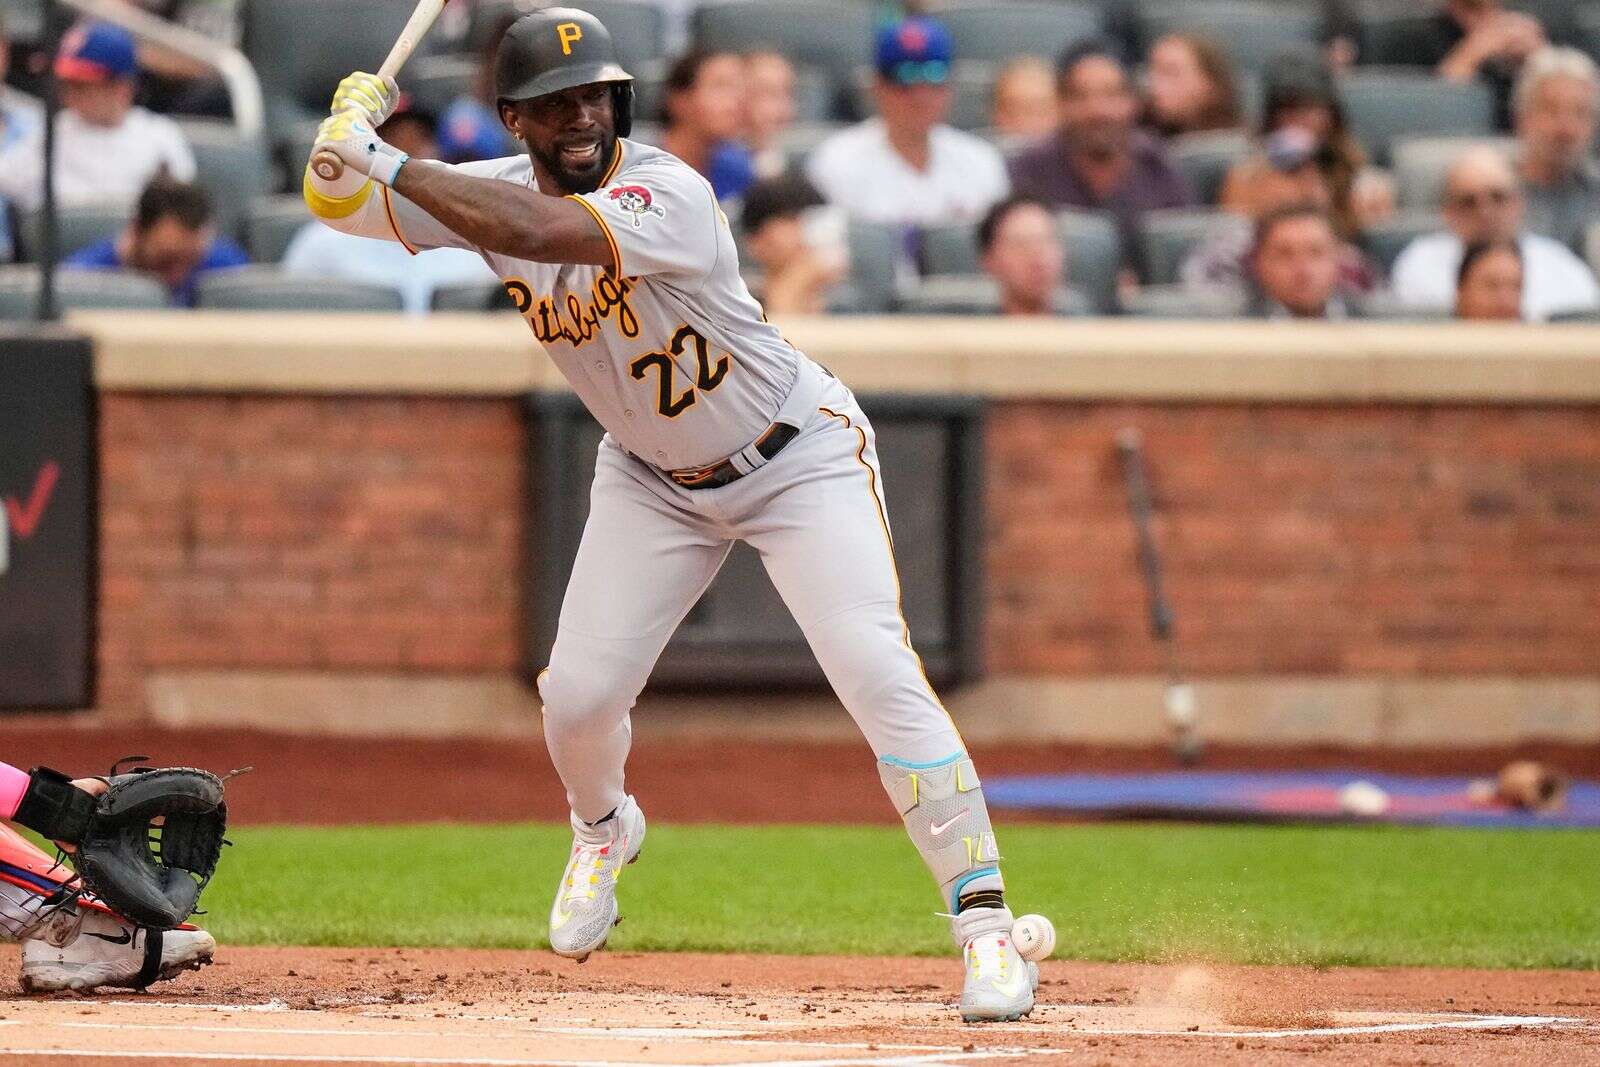 ANDREW MCCUTCHEN IS RETURNING TO THE PITTSBURGH PIRATES!! (Career